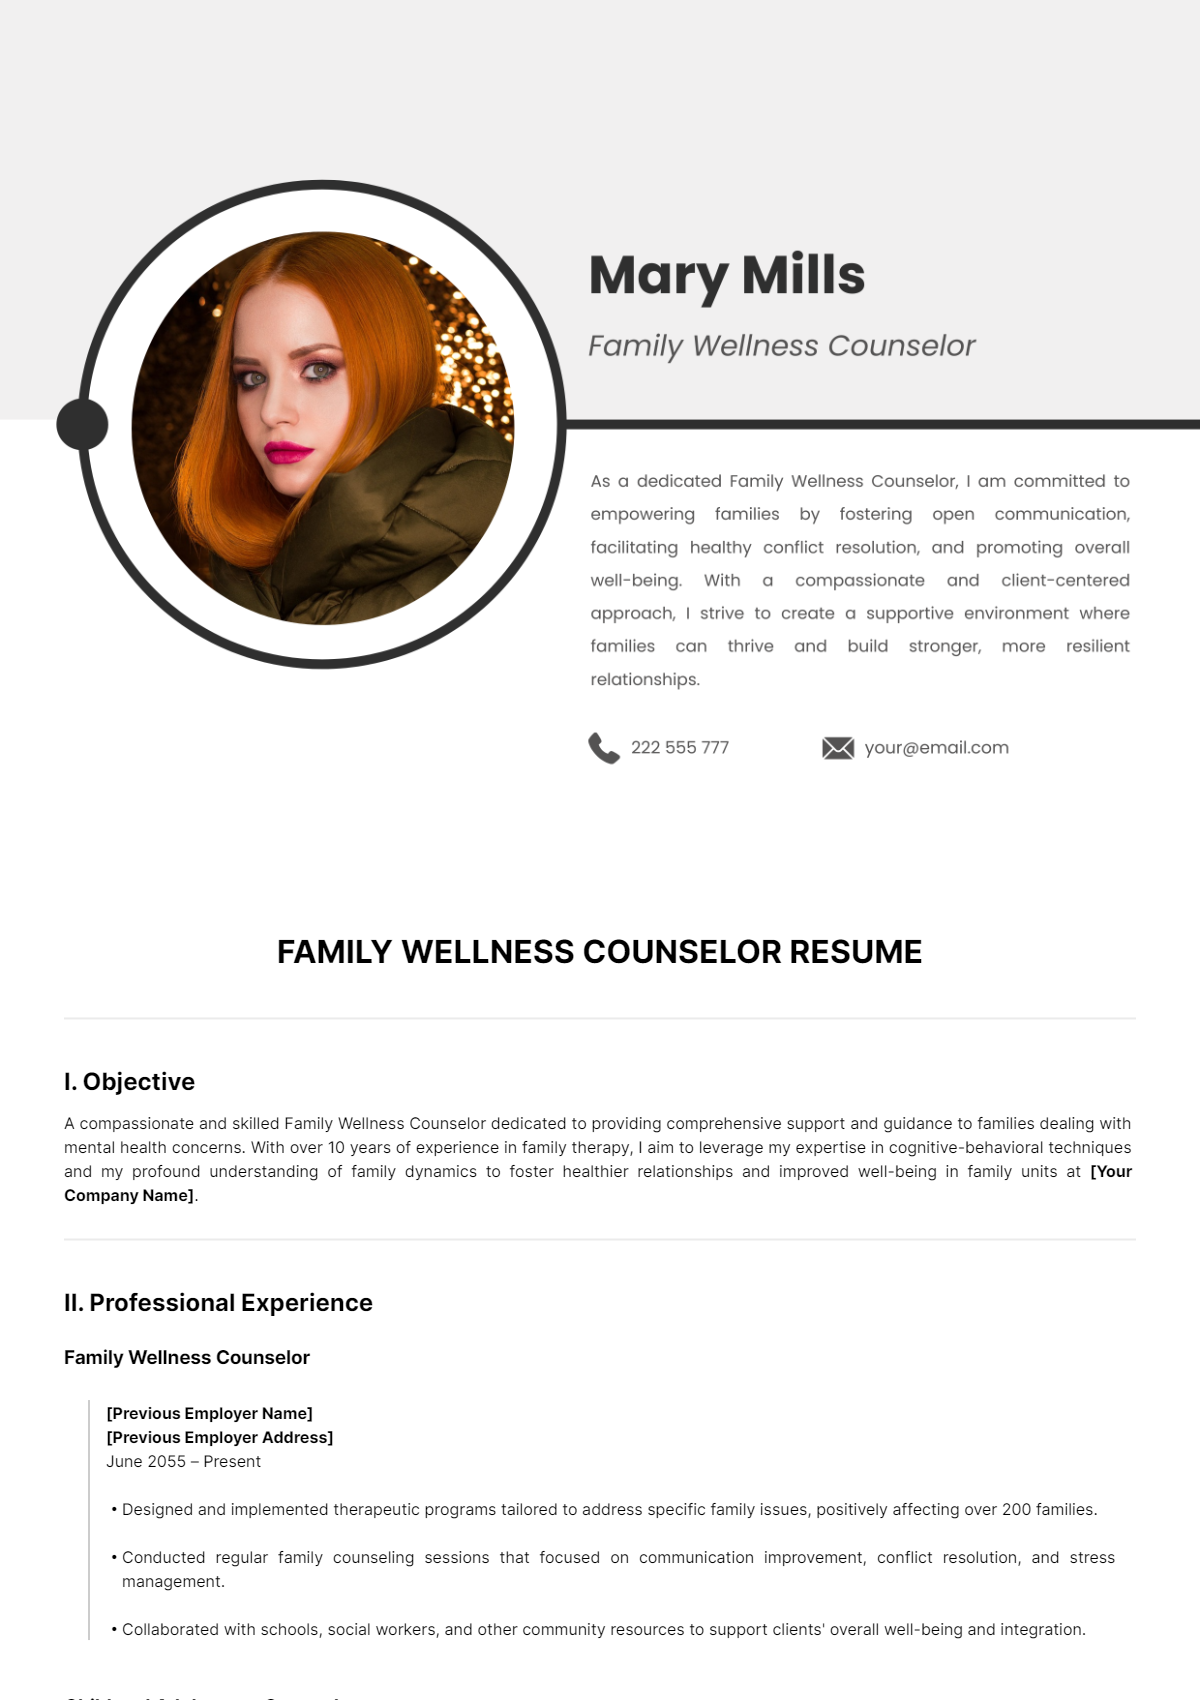 Family Wellness Counselor Resume Template